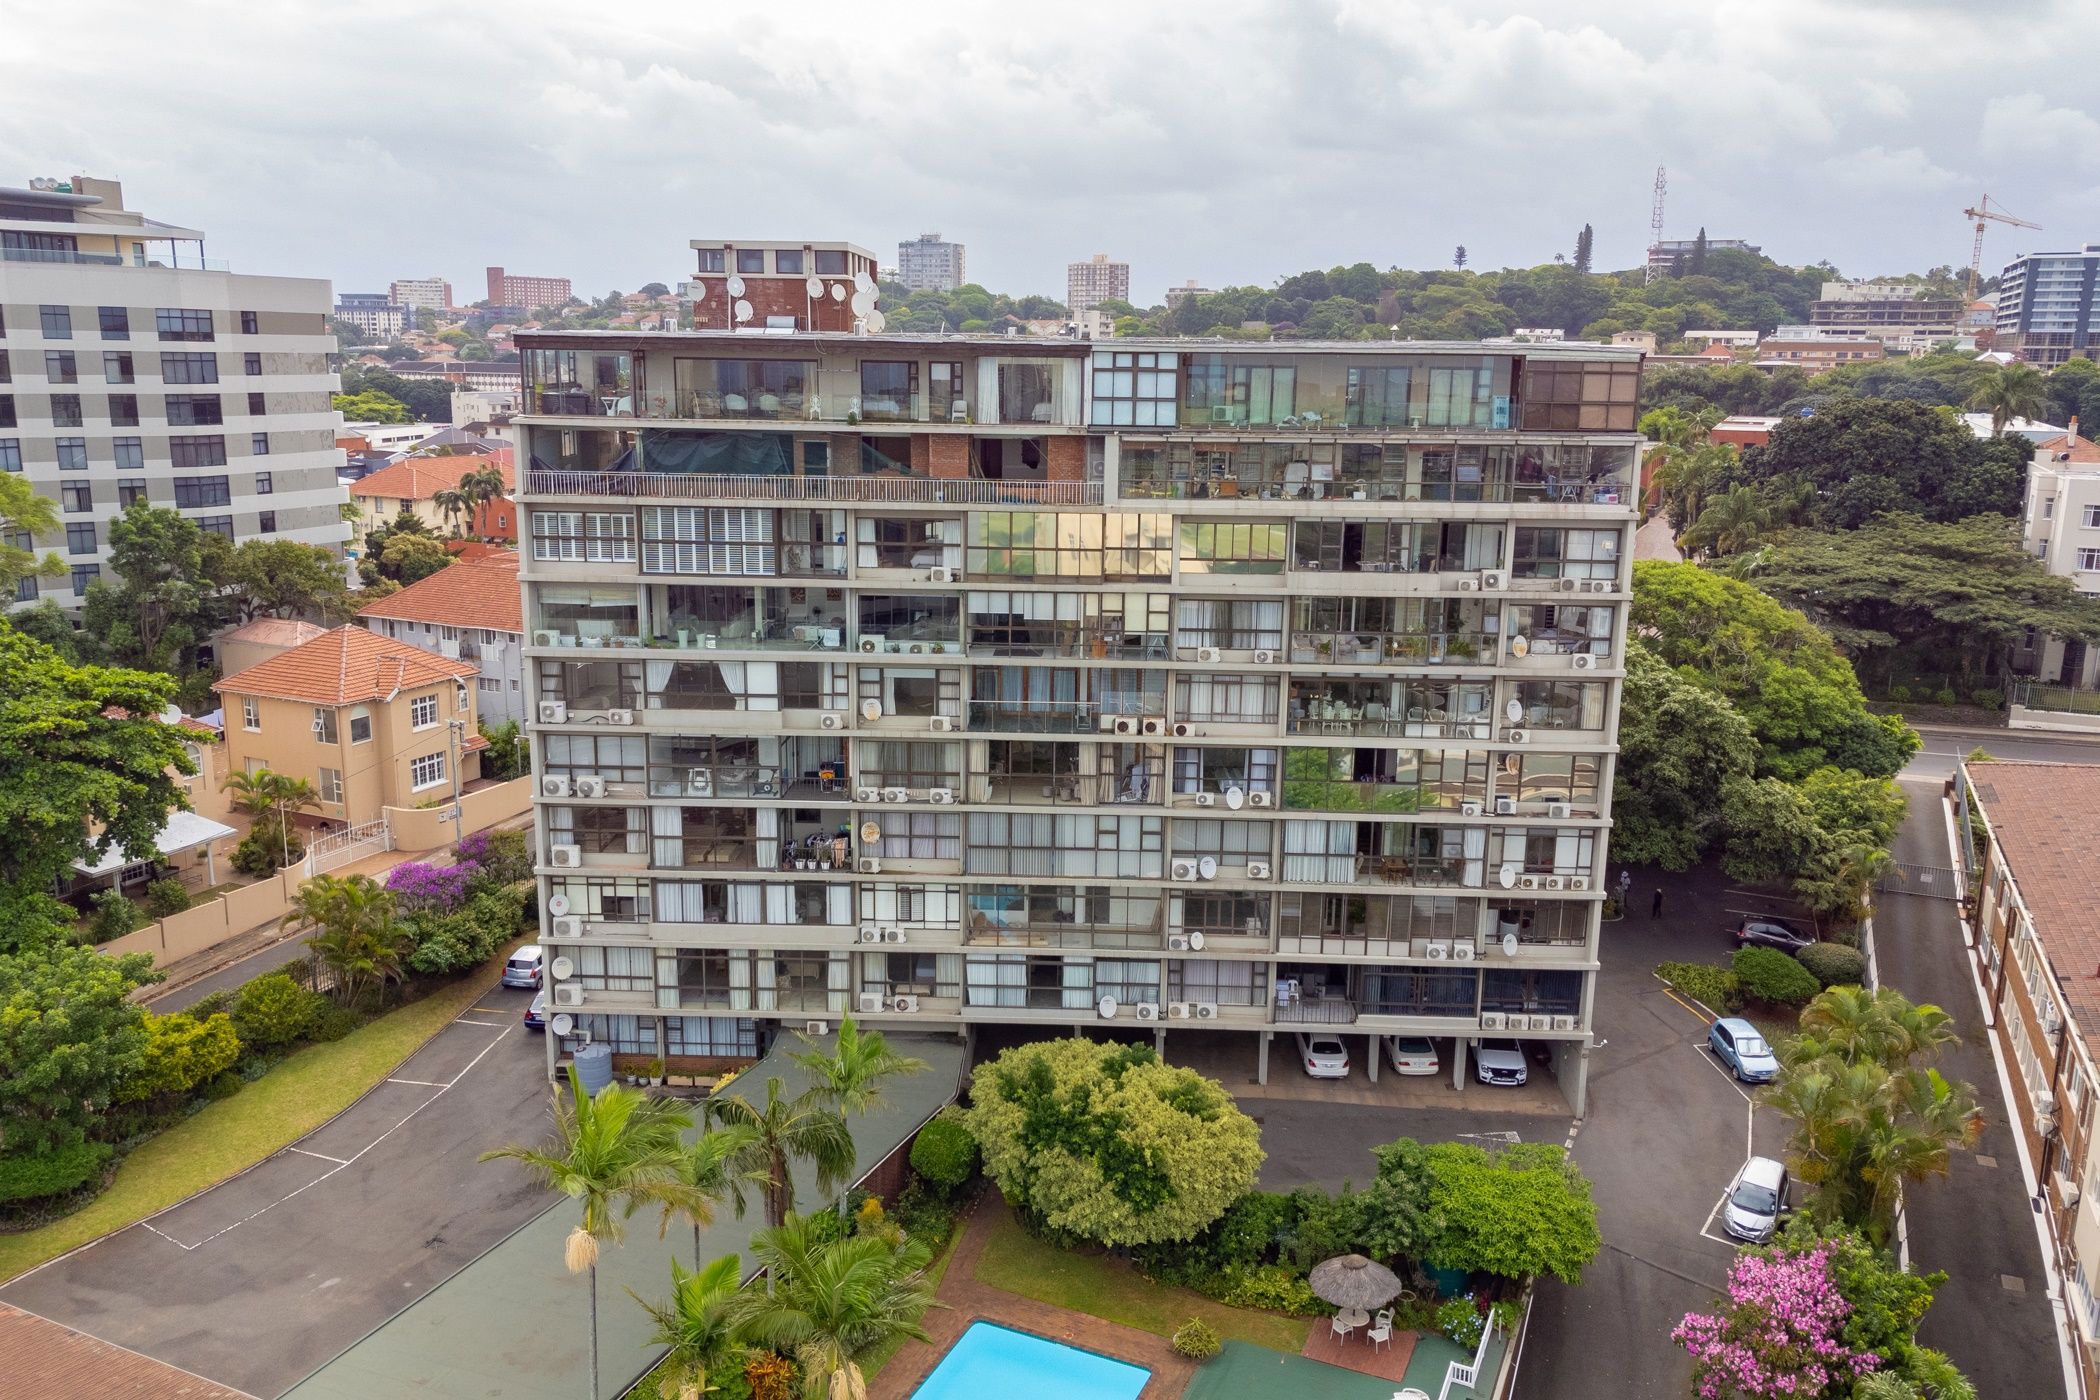  Exquisite 3-Bedroom Penthouse For Sale in Musgrave